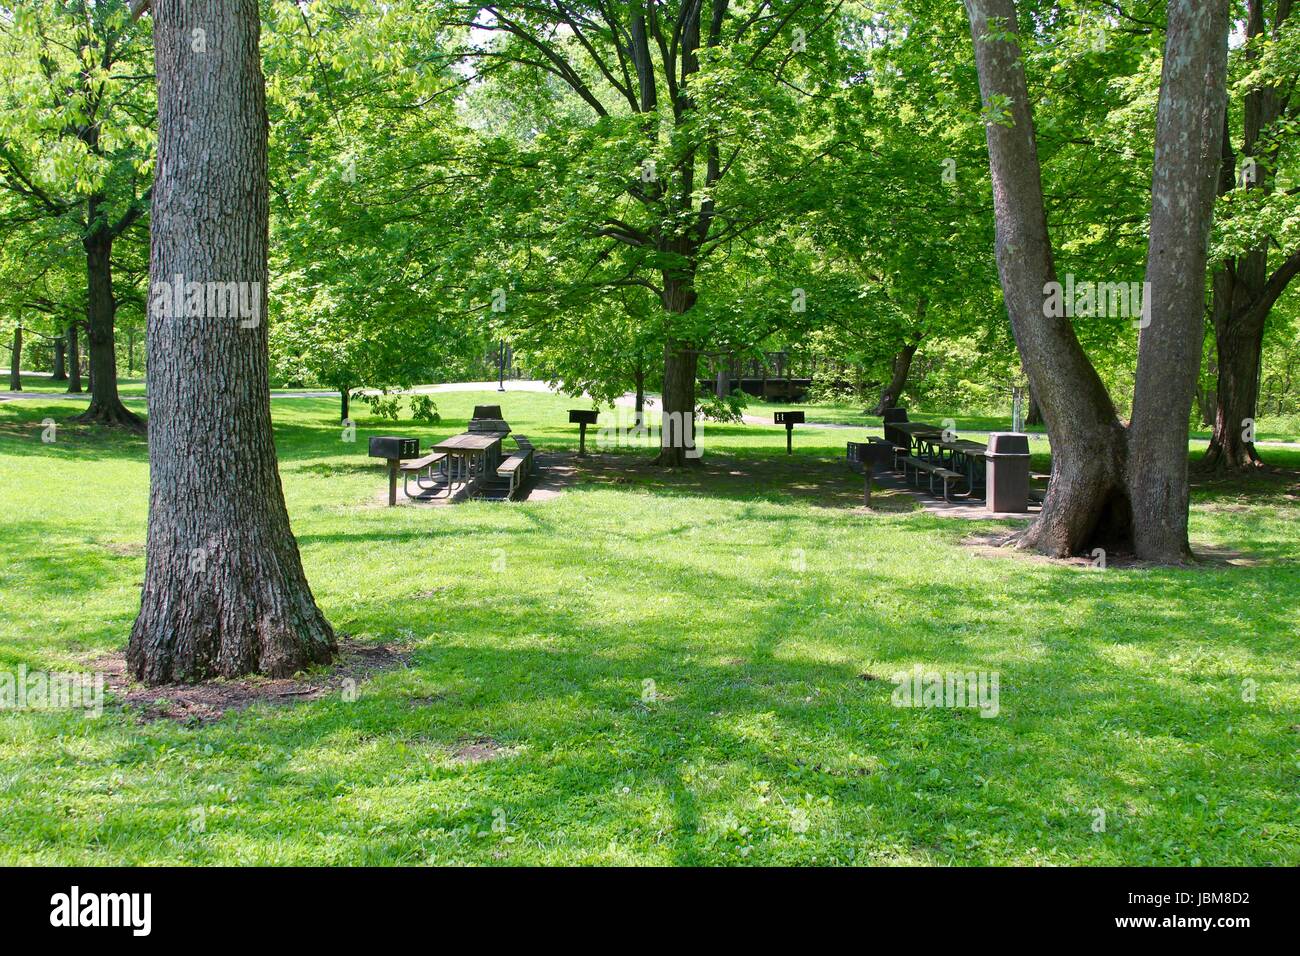 A sunny day in the park with all the nature and odds and ends of the ...